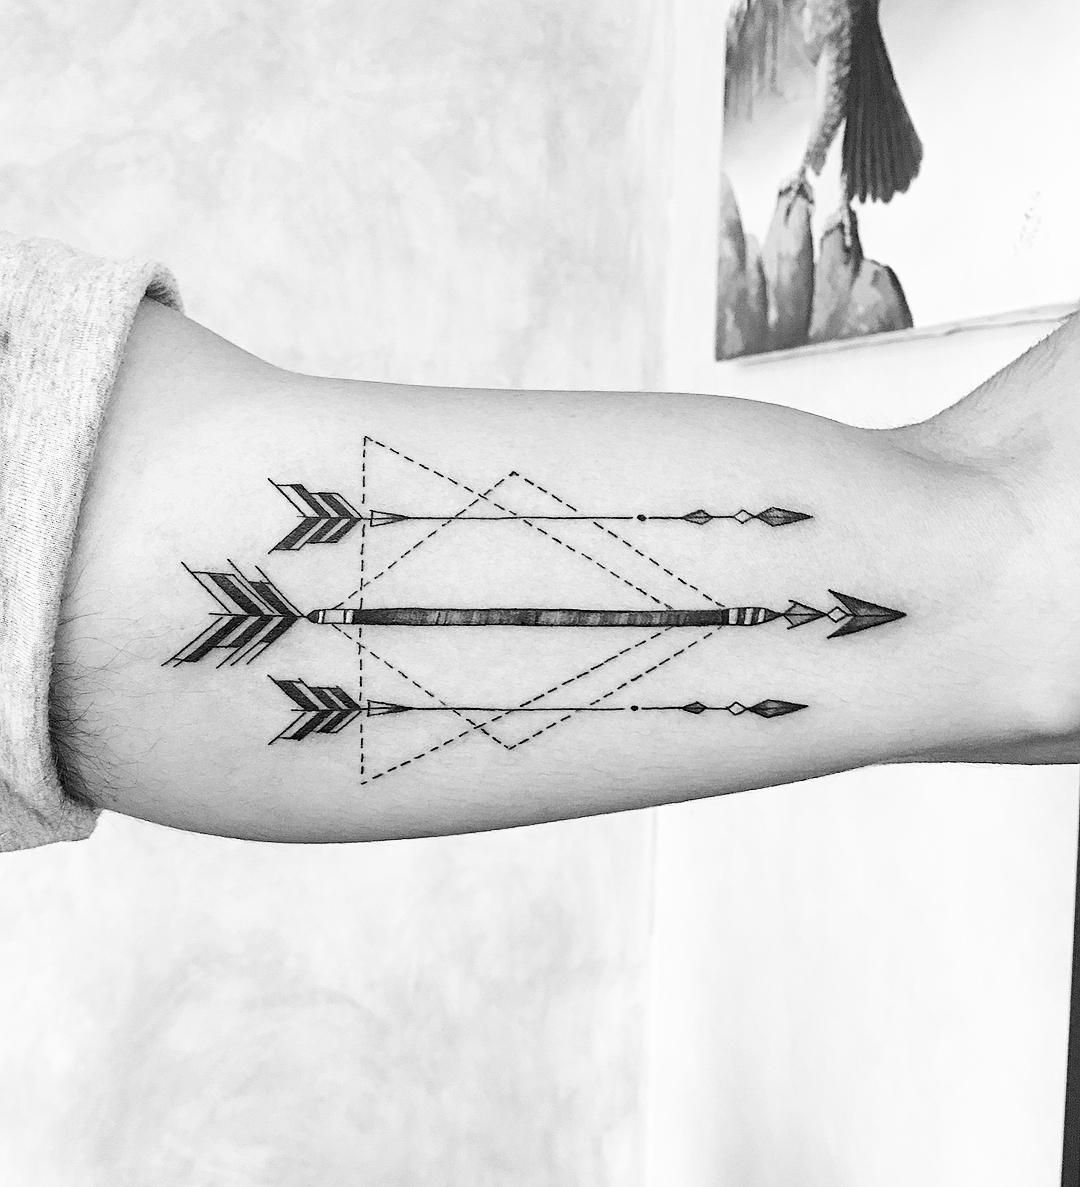 Arrows and geometry by @soychapa